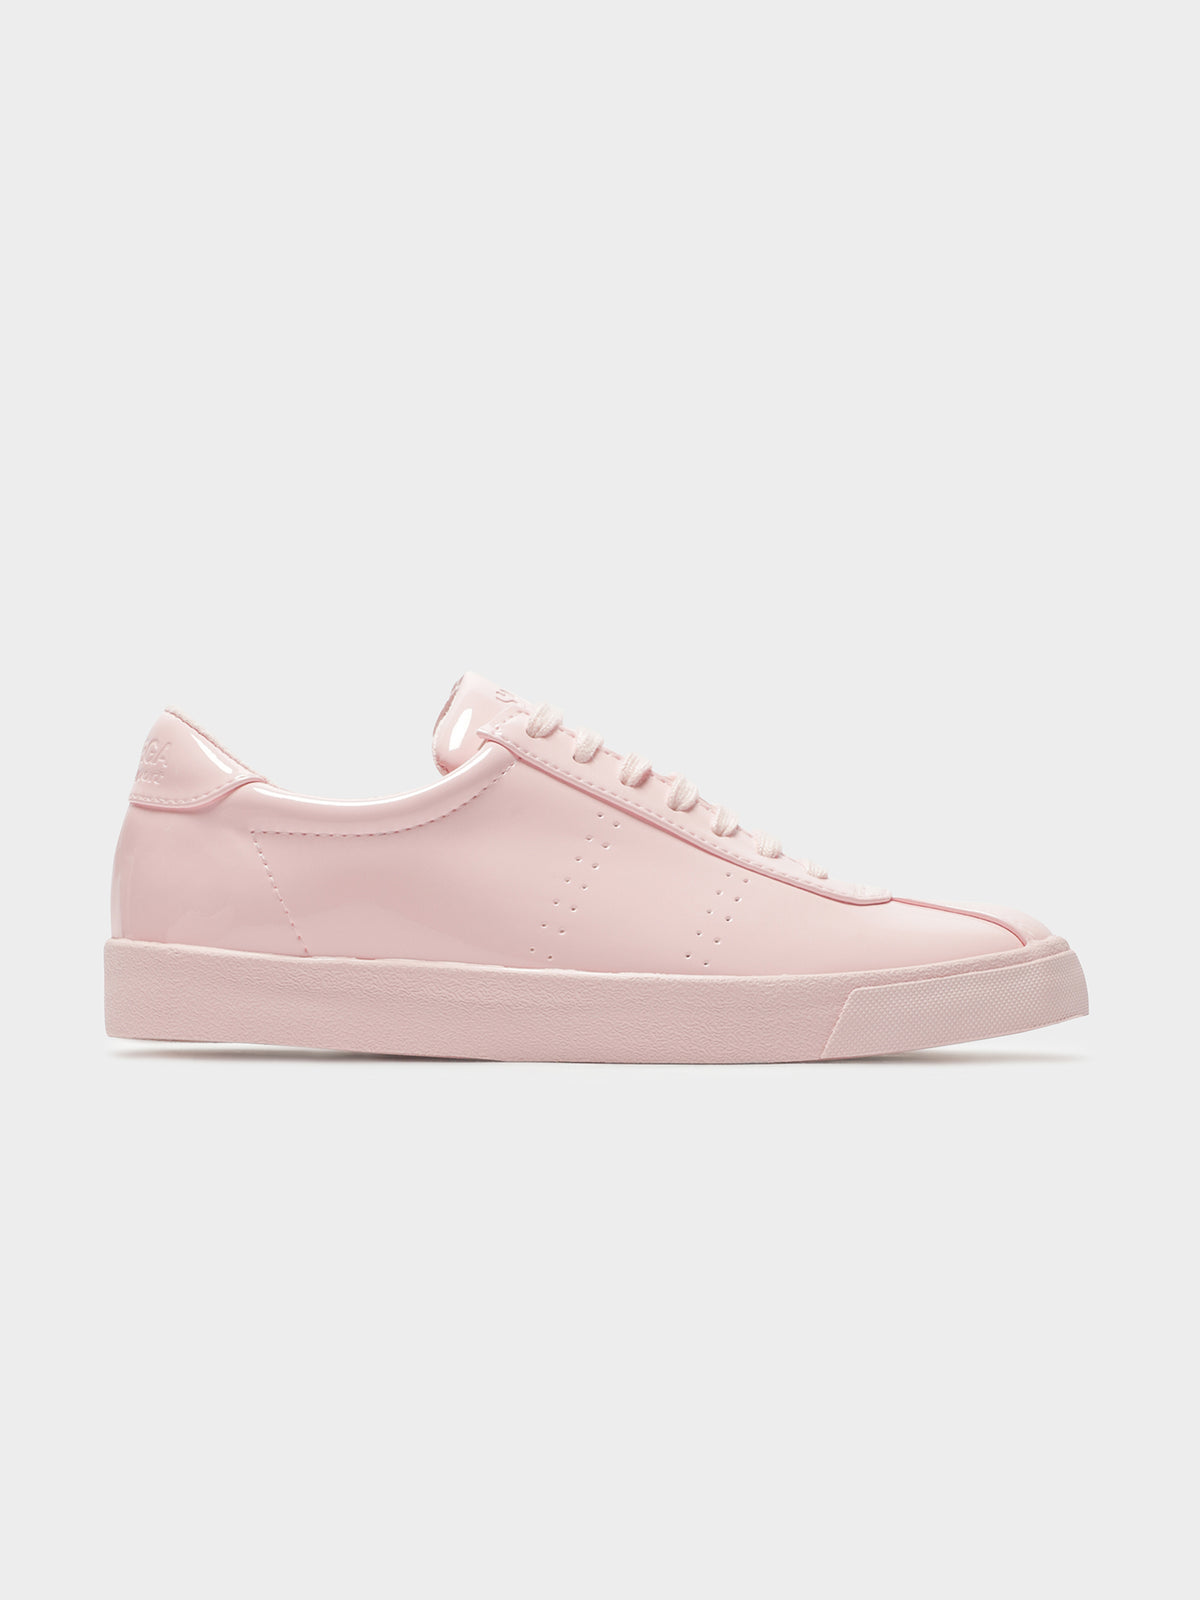 Womens 2843 Clubs Syneaw Pastel Sneakers in Soft Pink